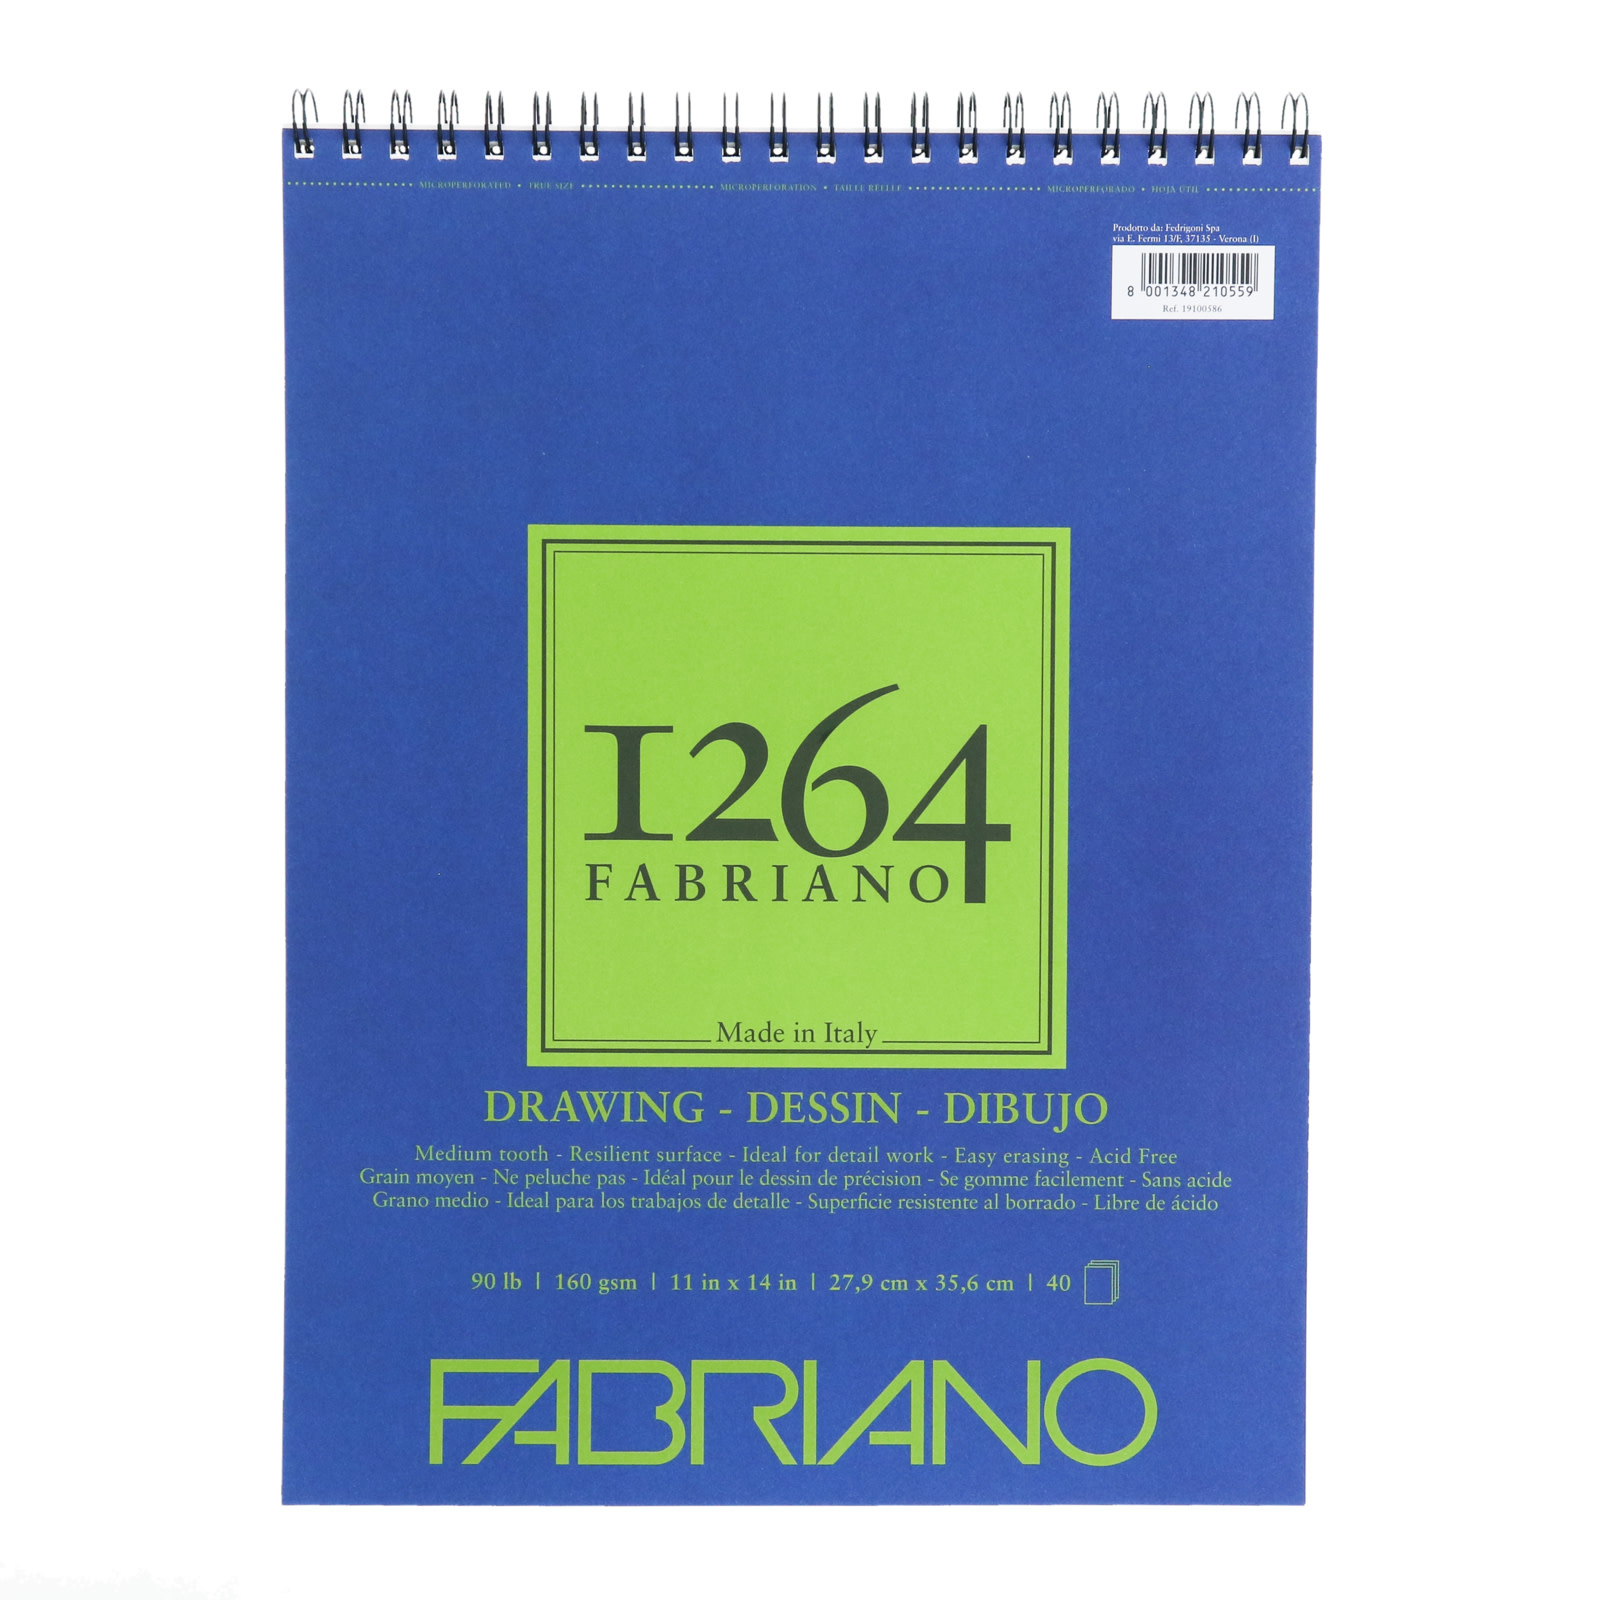 Fabriano 1264 Drawing Pads, 11" x 14" - 90lb. (160 gsm), 40 Sheets